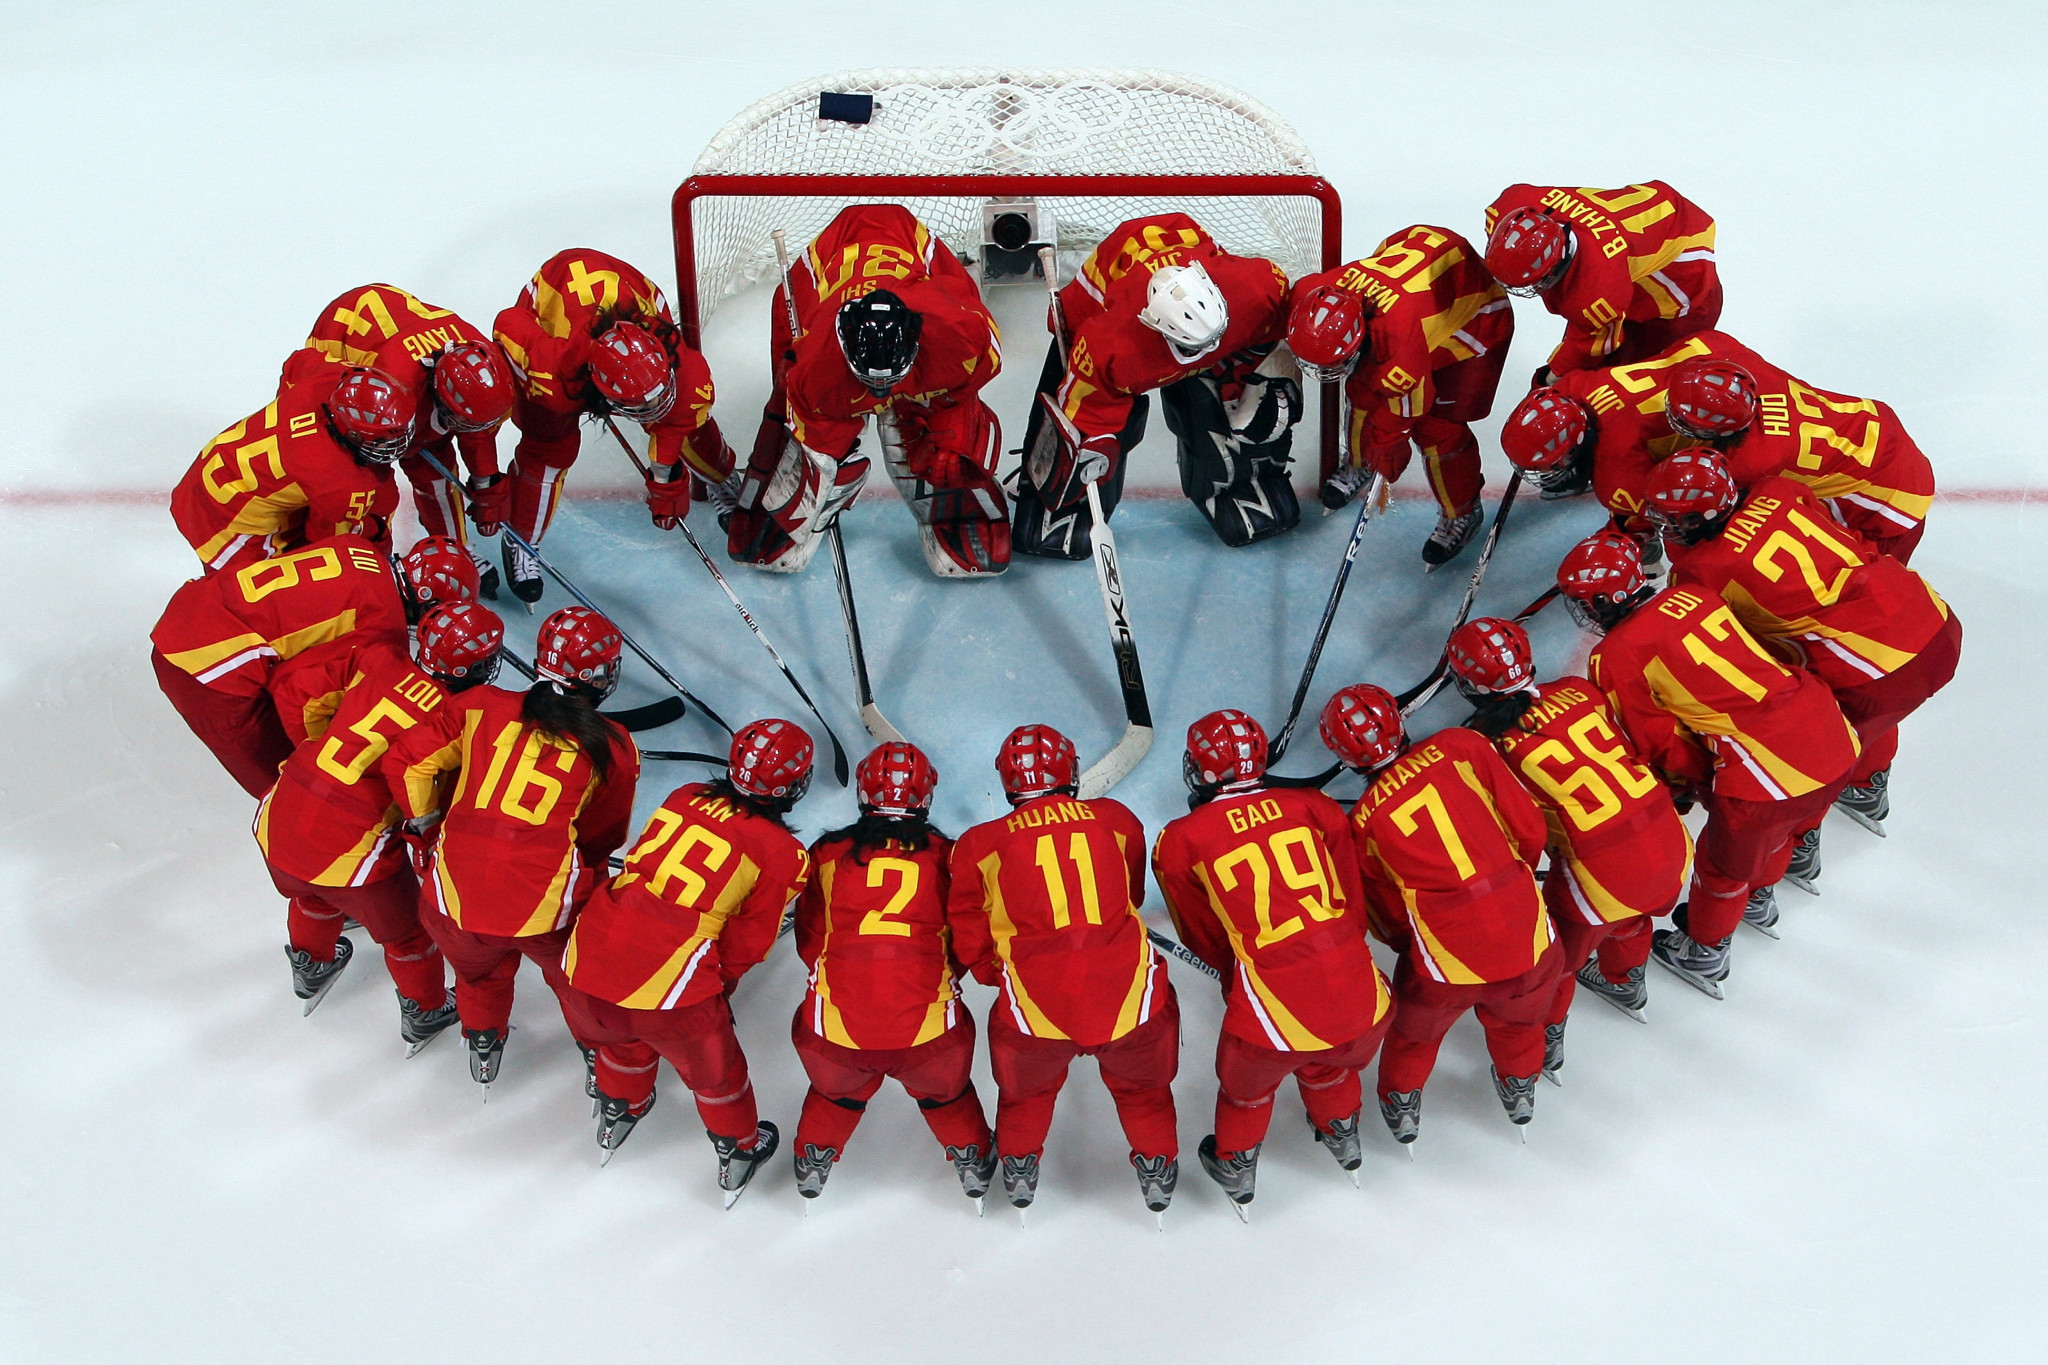 Two Chinese ice hockey players test positive for coronavirus after United States trip